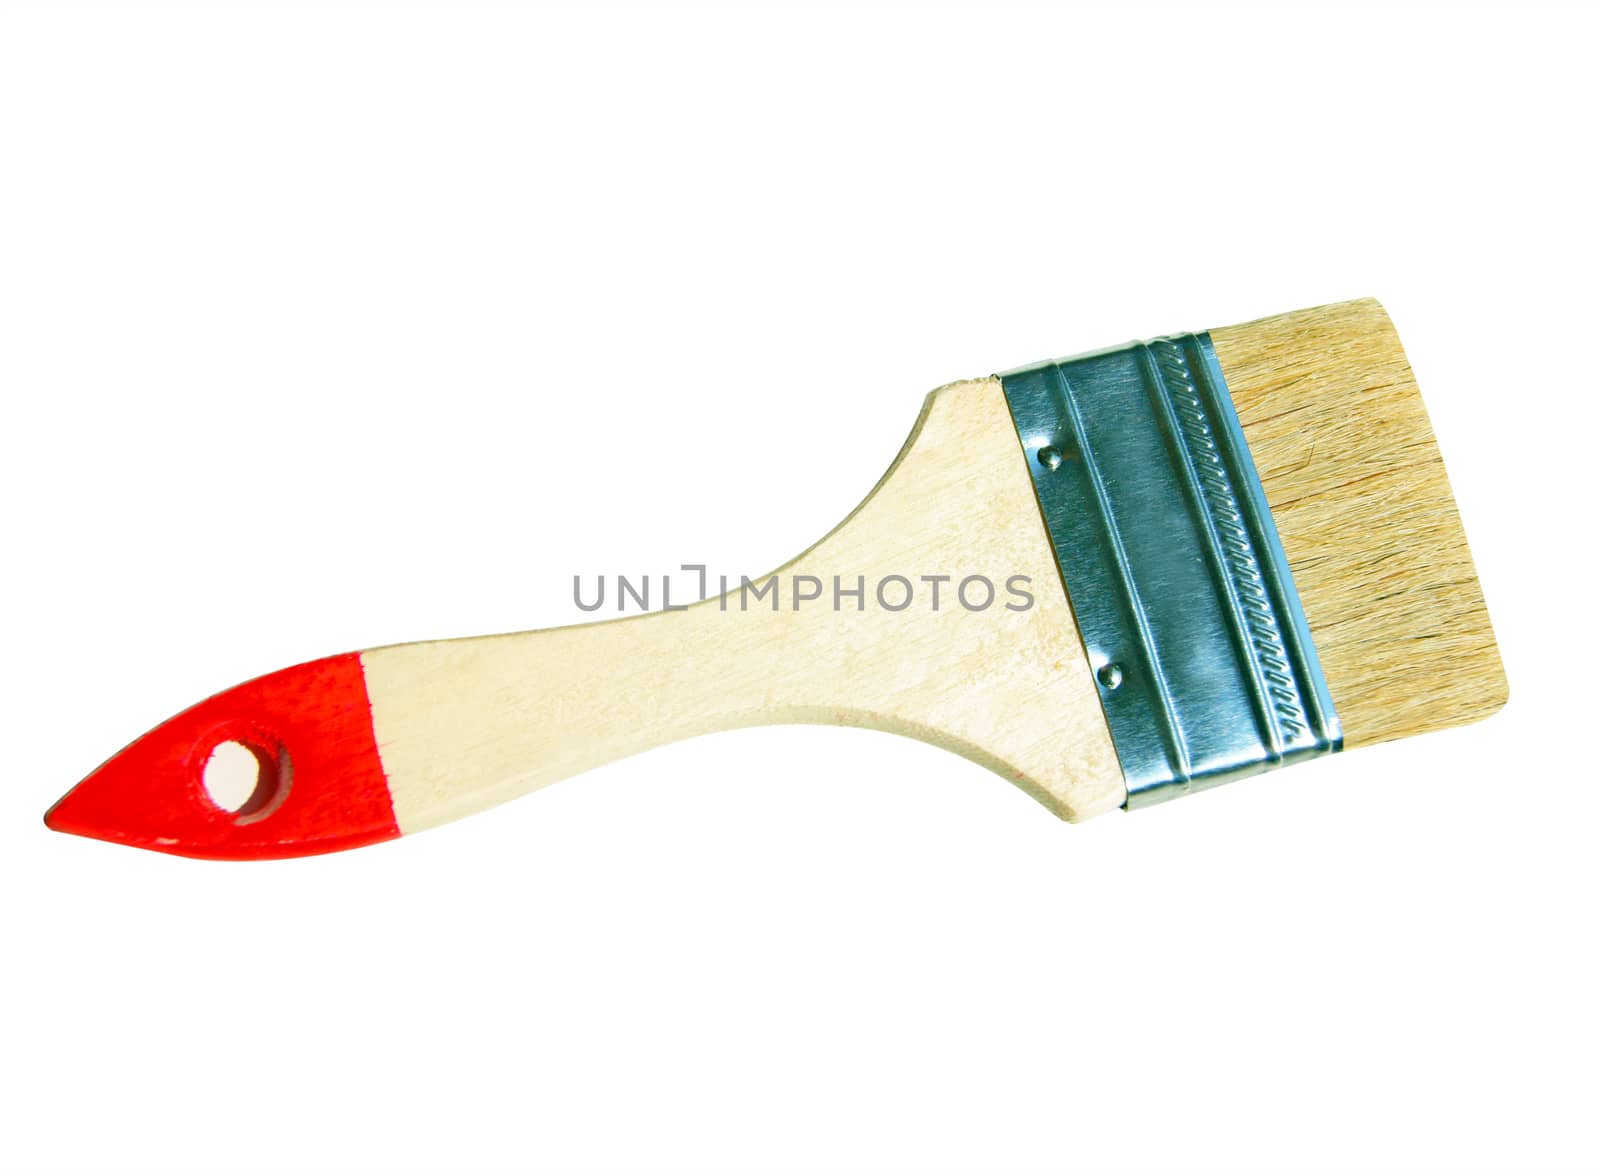 Paint brush for painting and other chores.